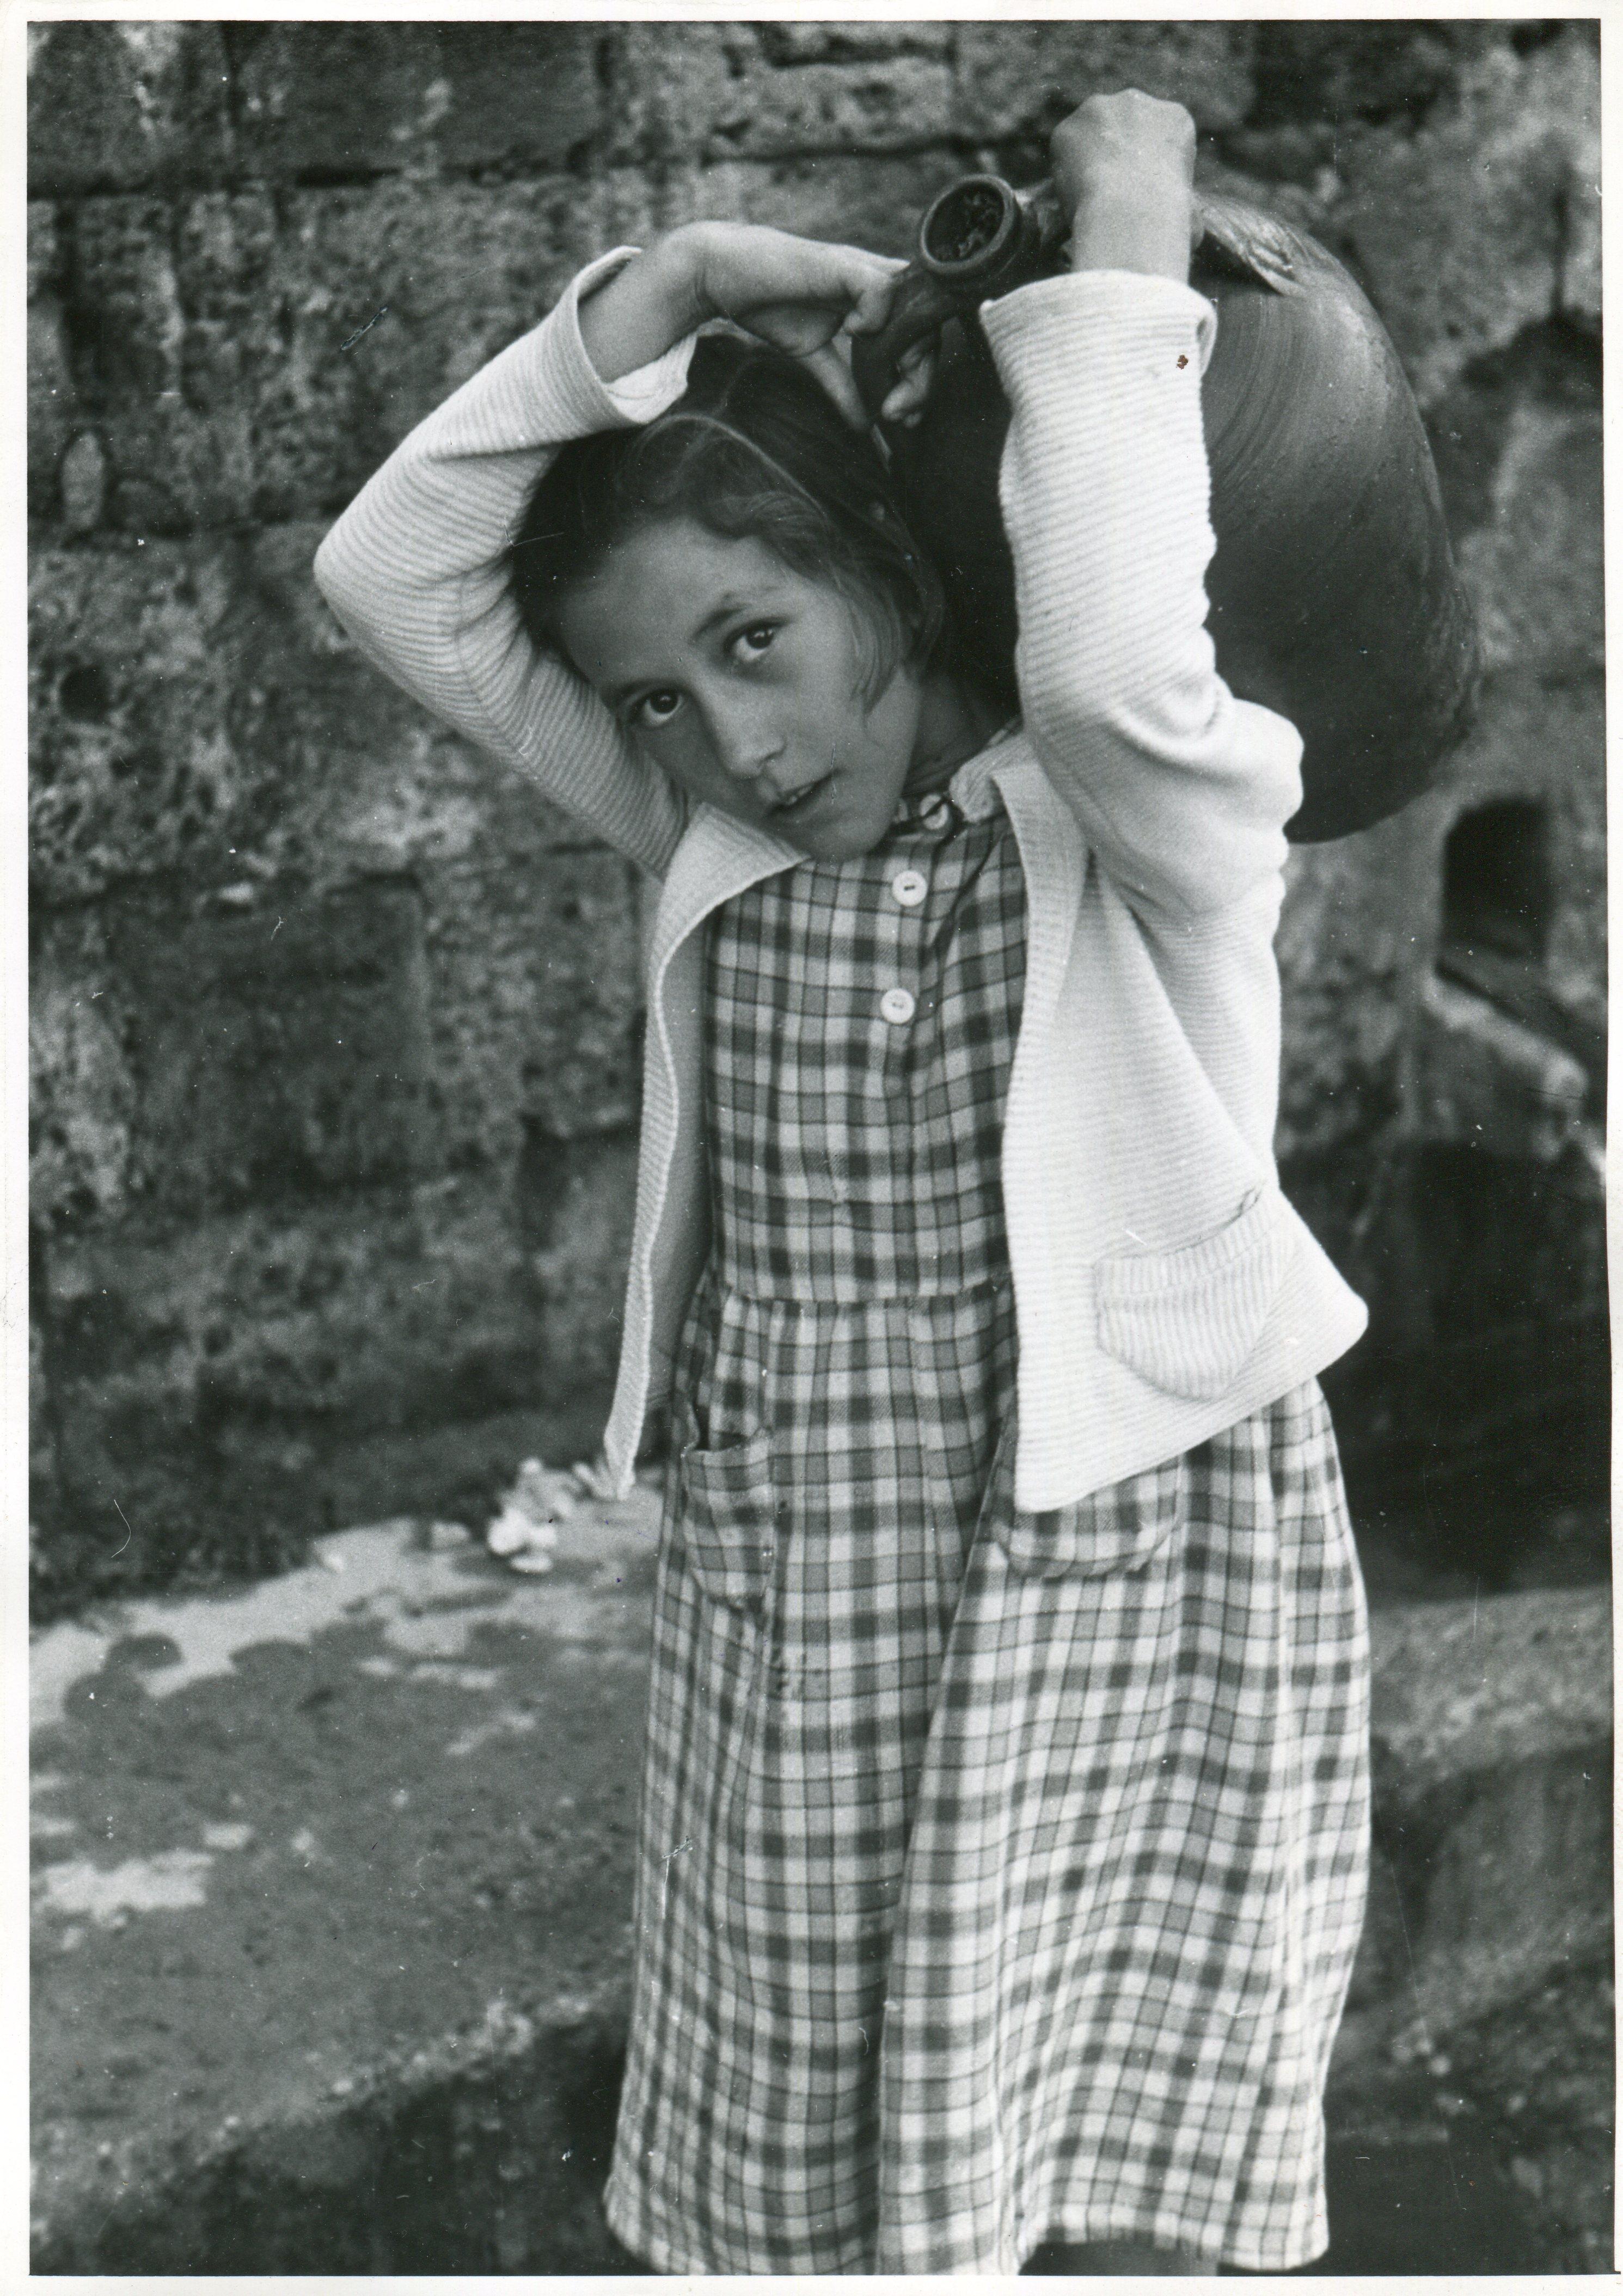 Erich Andres Black and White Photograph - Rhodos - Girl with water jug